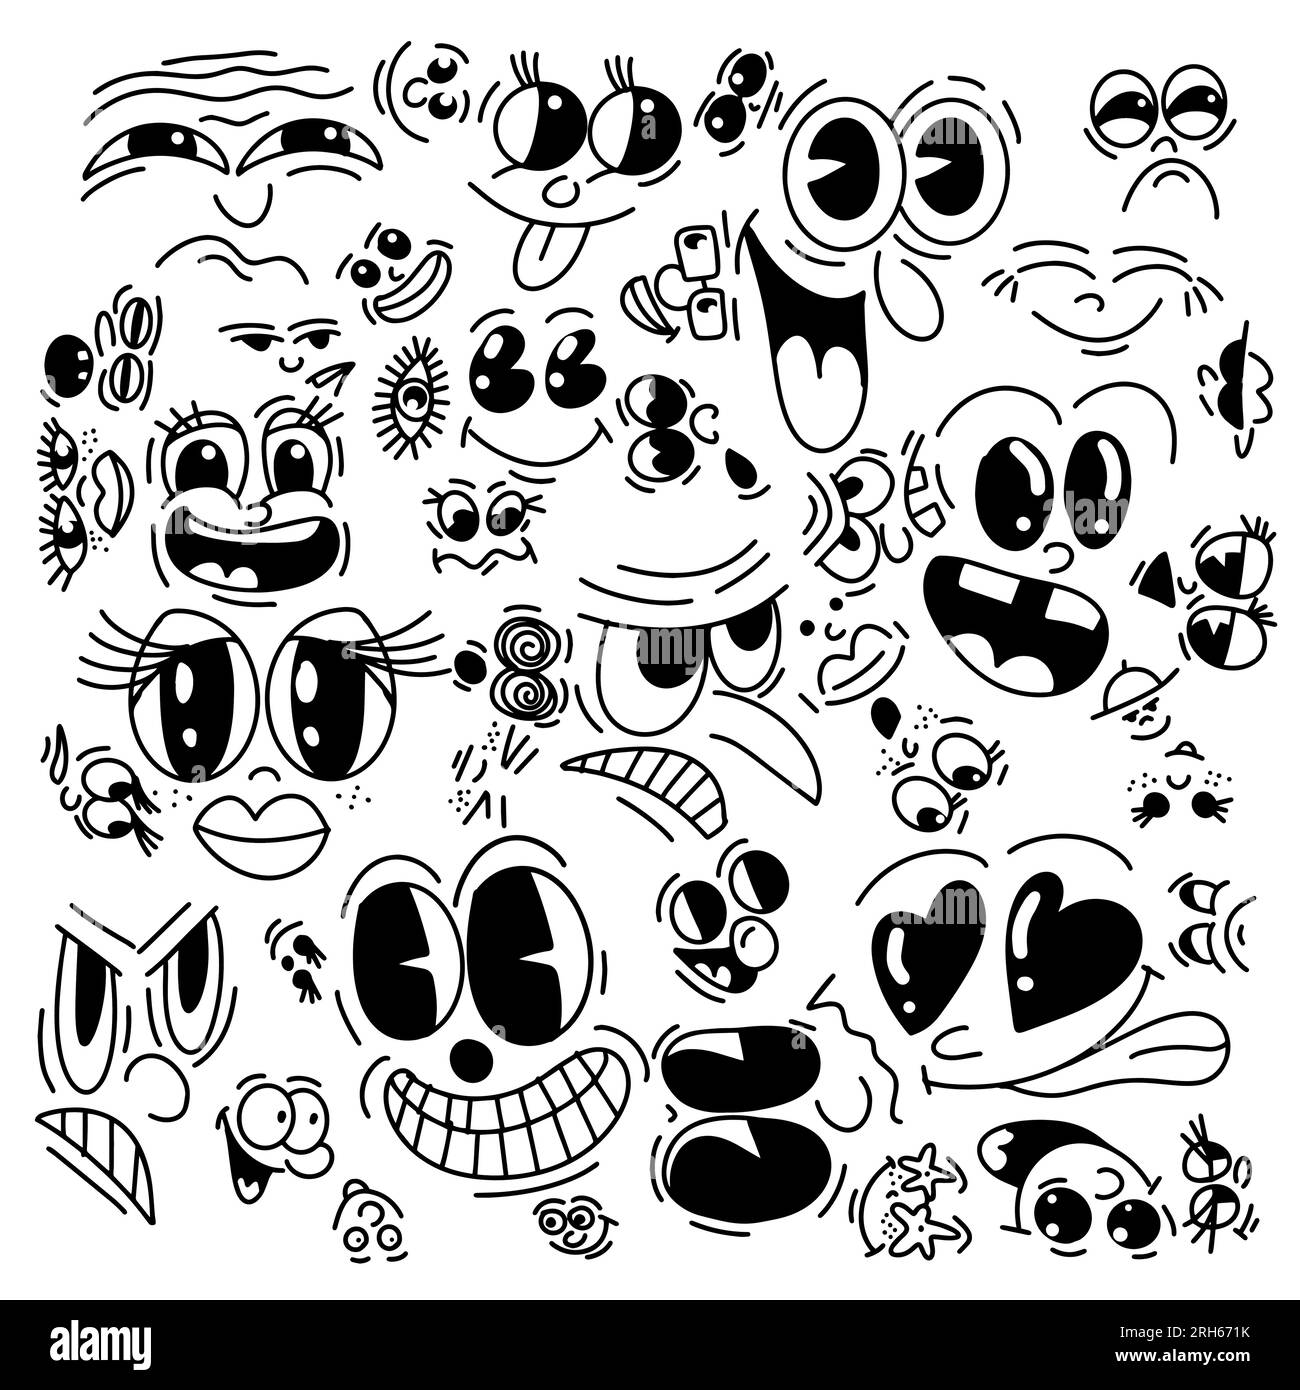 Vintage funny set of cartoon faces. Retro quirky characters smile vector set. Funny avatars with big cheeks, eyes and mouth. Stock Vector